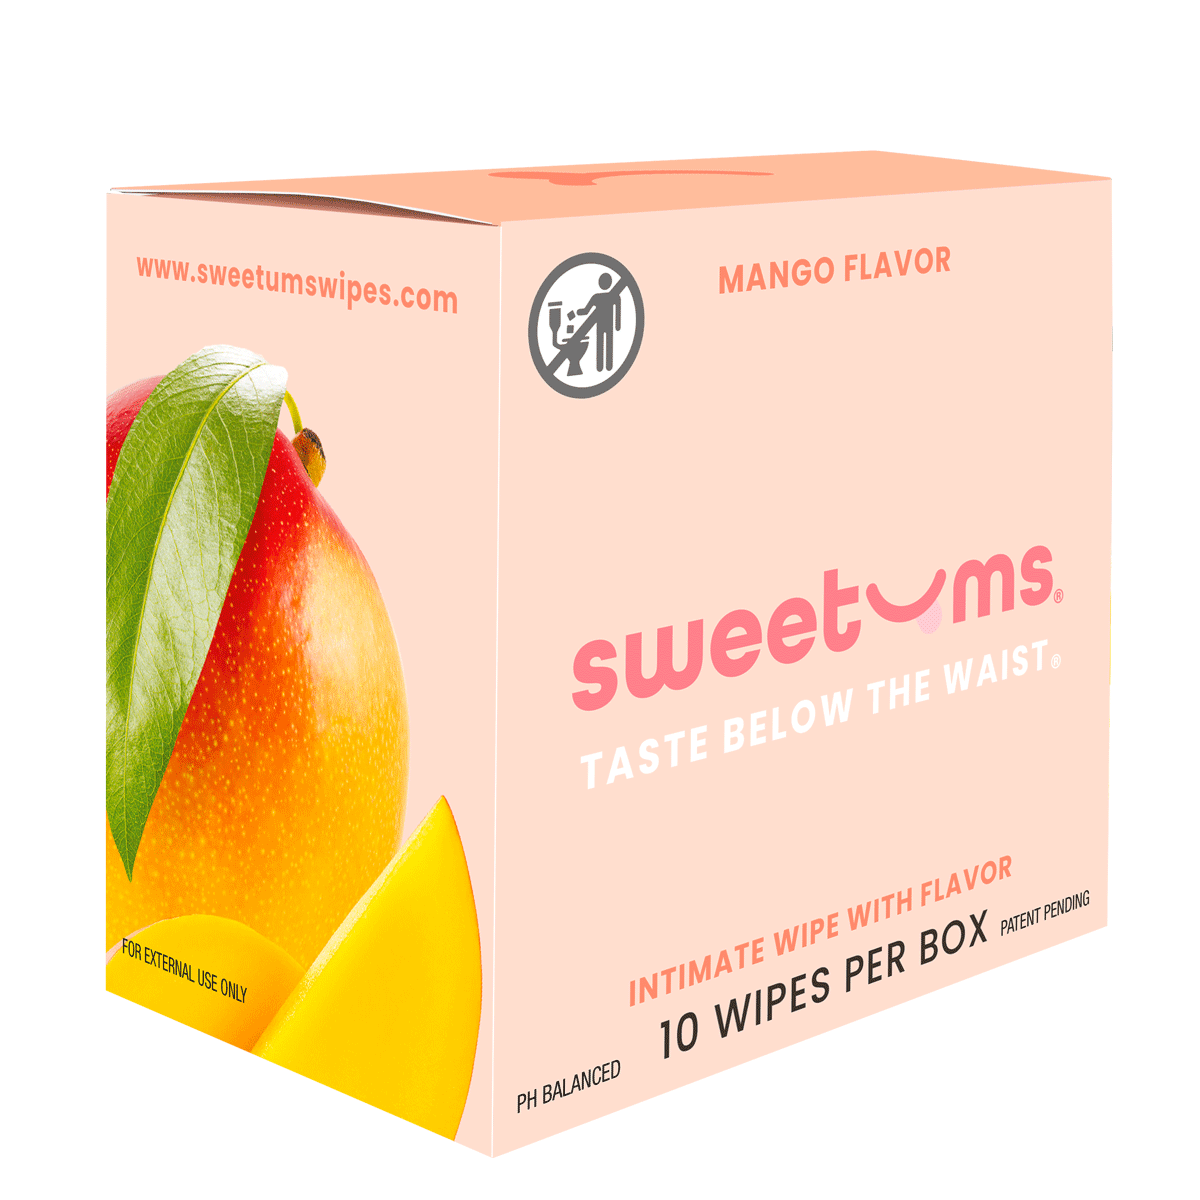 Sweetums Flavored Wipes for women Mango Flavor